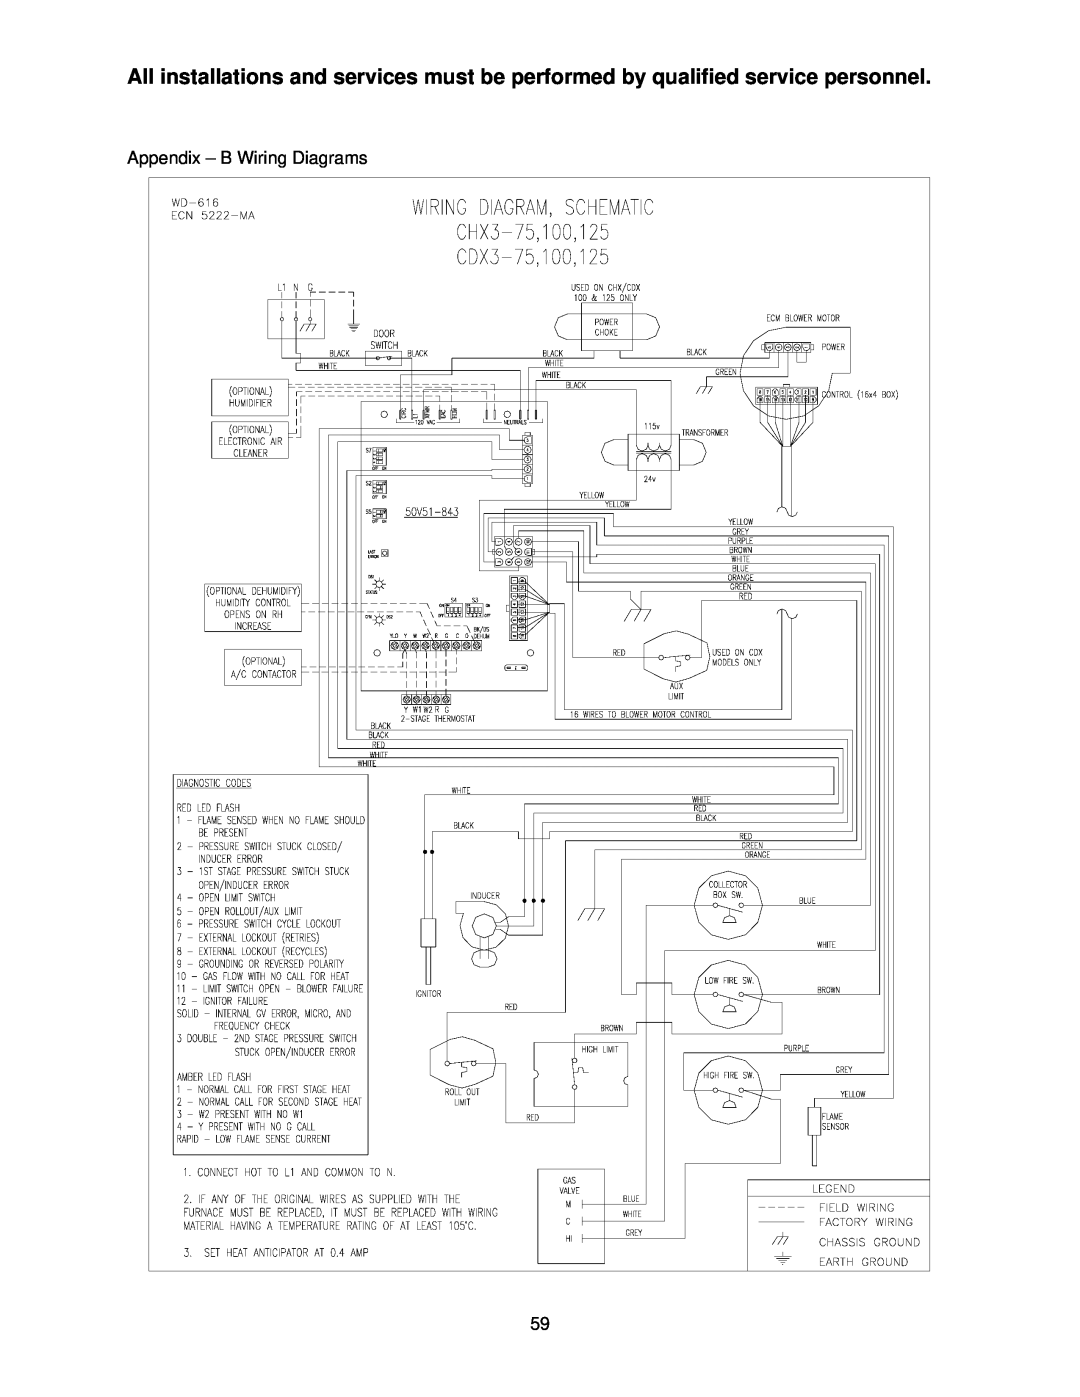 Thermo Products 125n, chx-3 75n, 100n operation manual Appendix – B Wiring Diagrams 